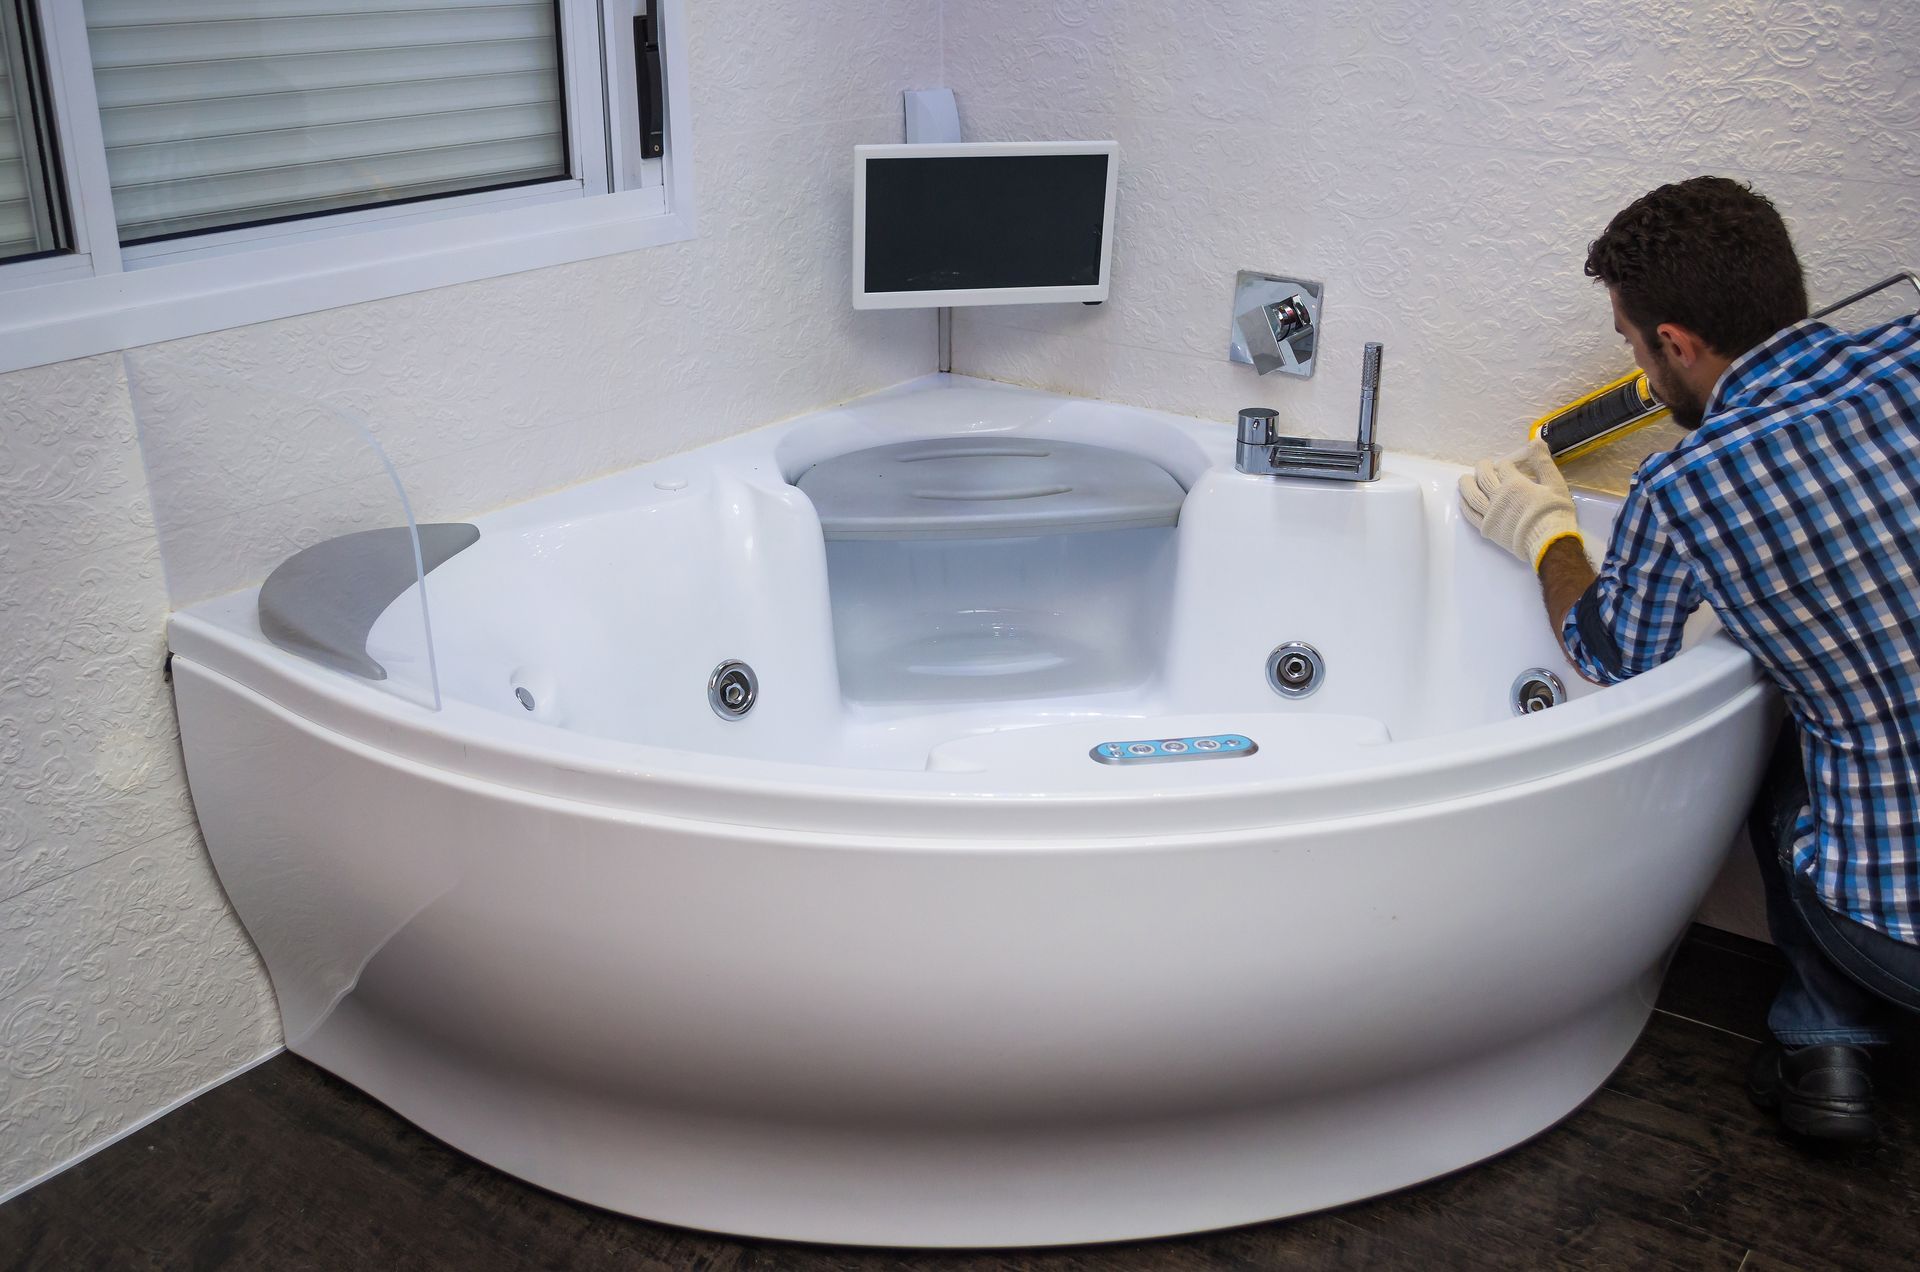 a man in a plaid shirt is working on a jacuzzi tub